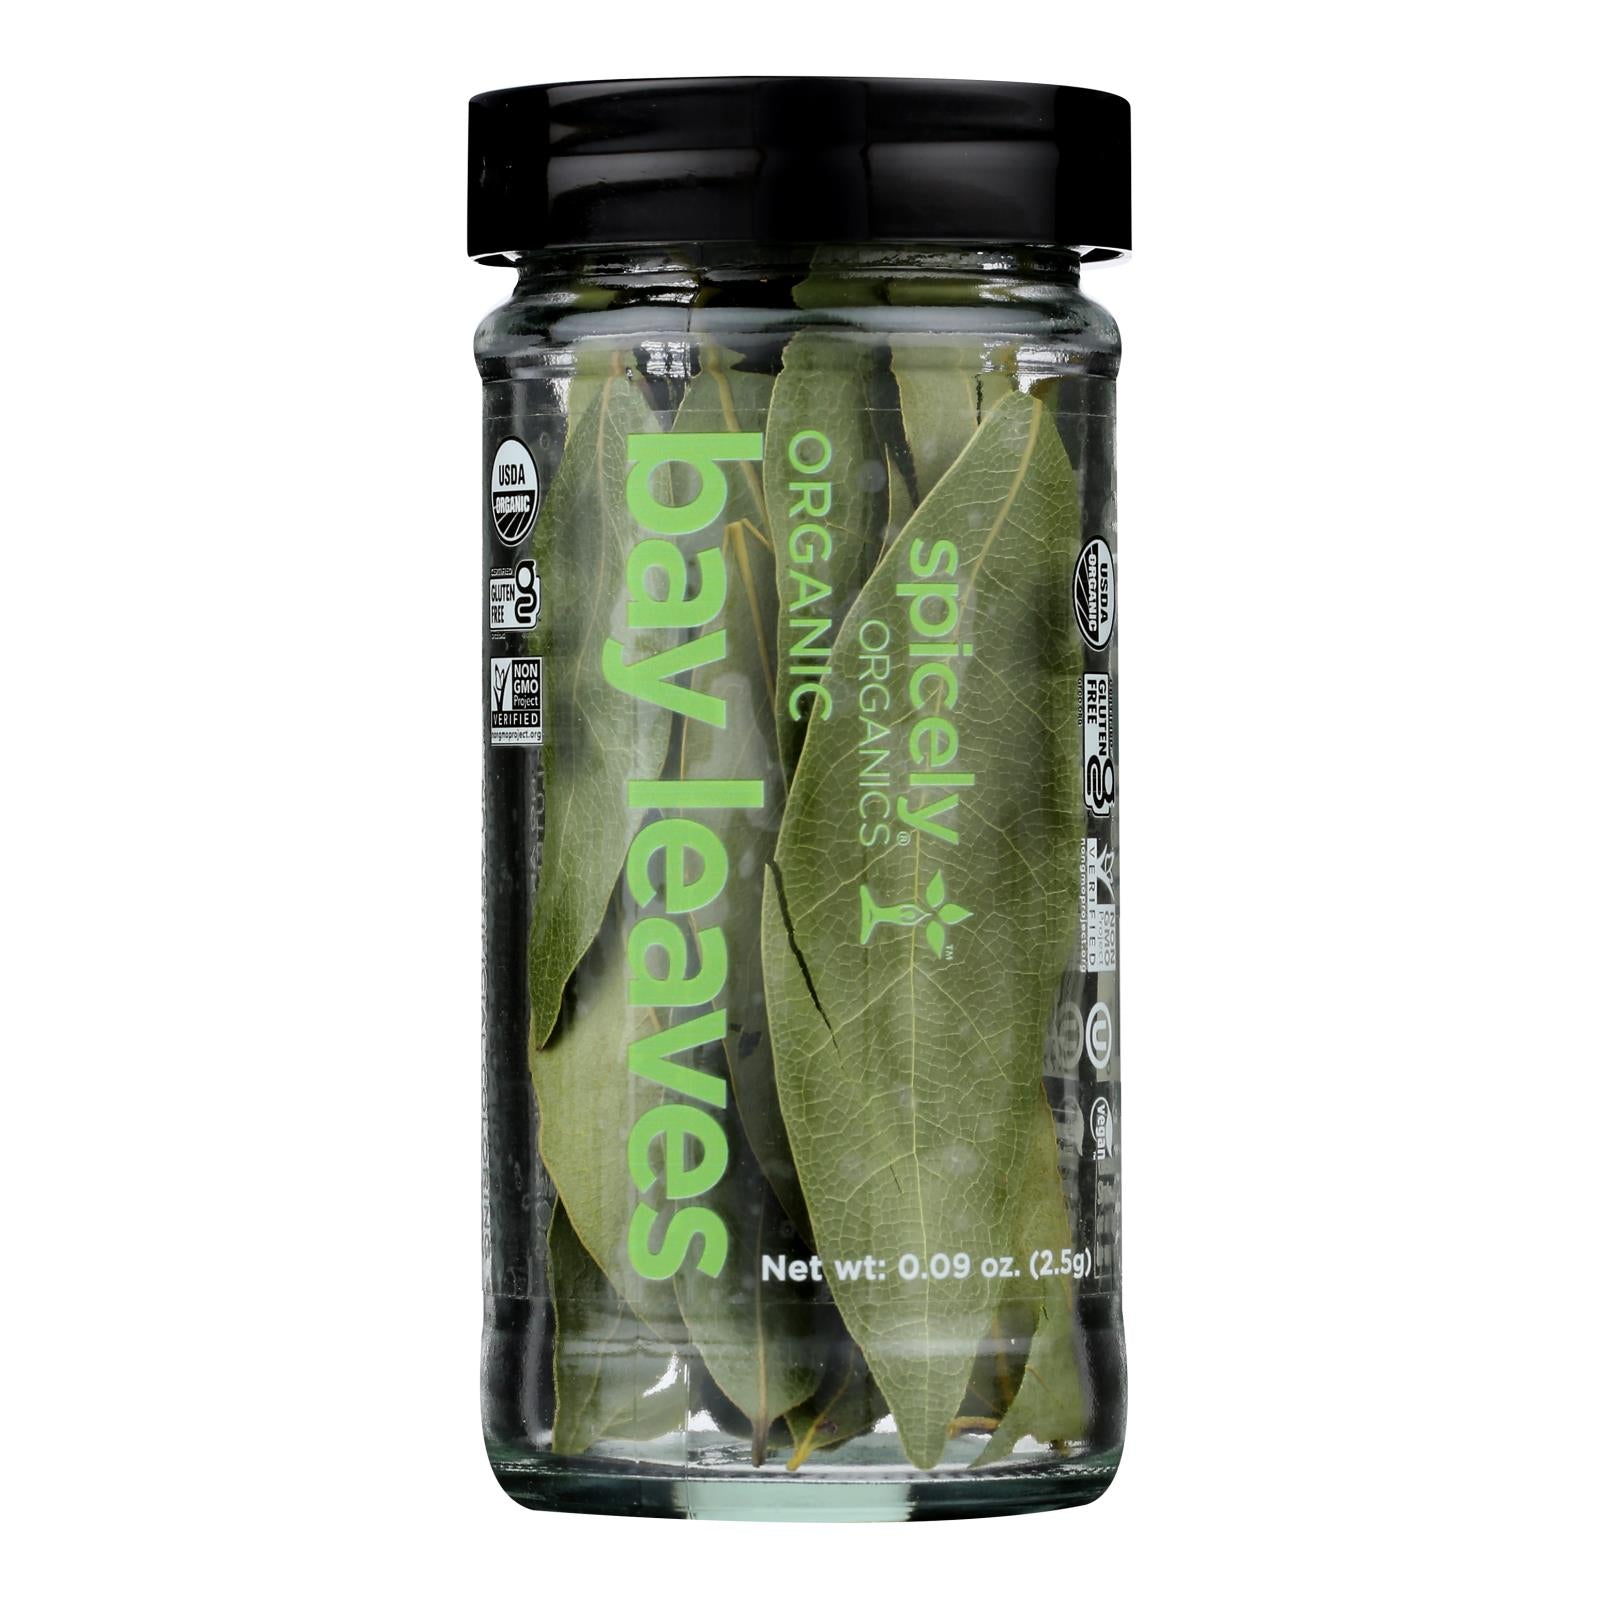 Spicely Organics - Organic Bay Leaves - Case Of 3 - 0.09 Oz.